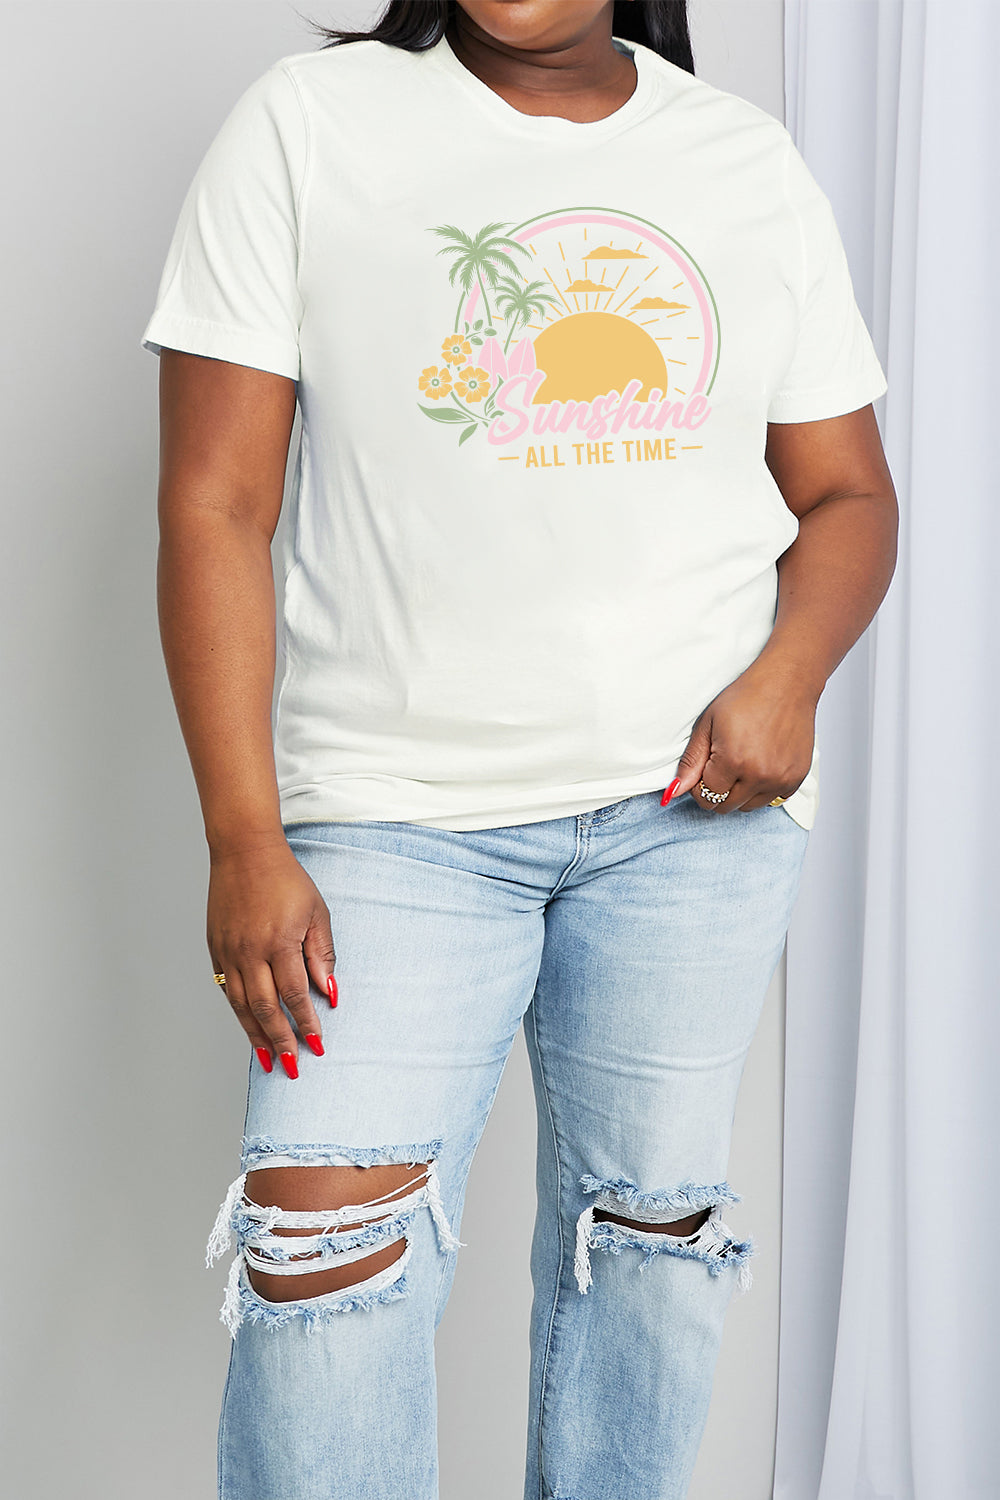 Simply Love Full Size SUNSHINE ALL THE TIME Graphic Cotton Tee